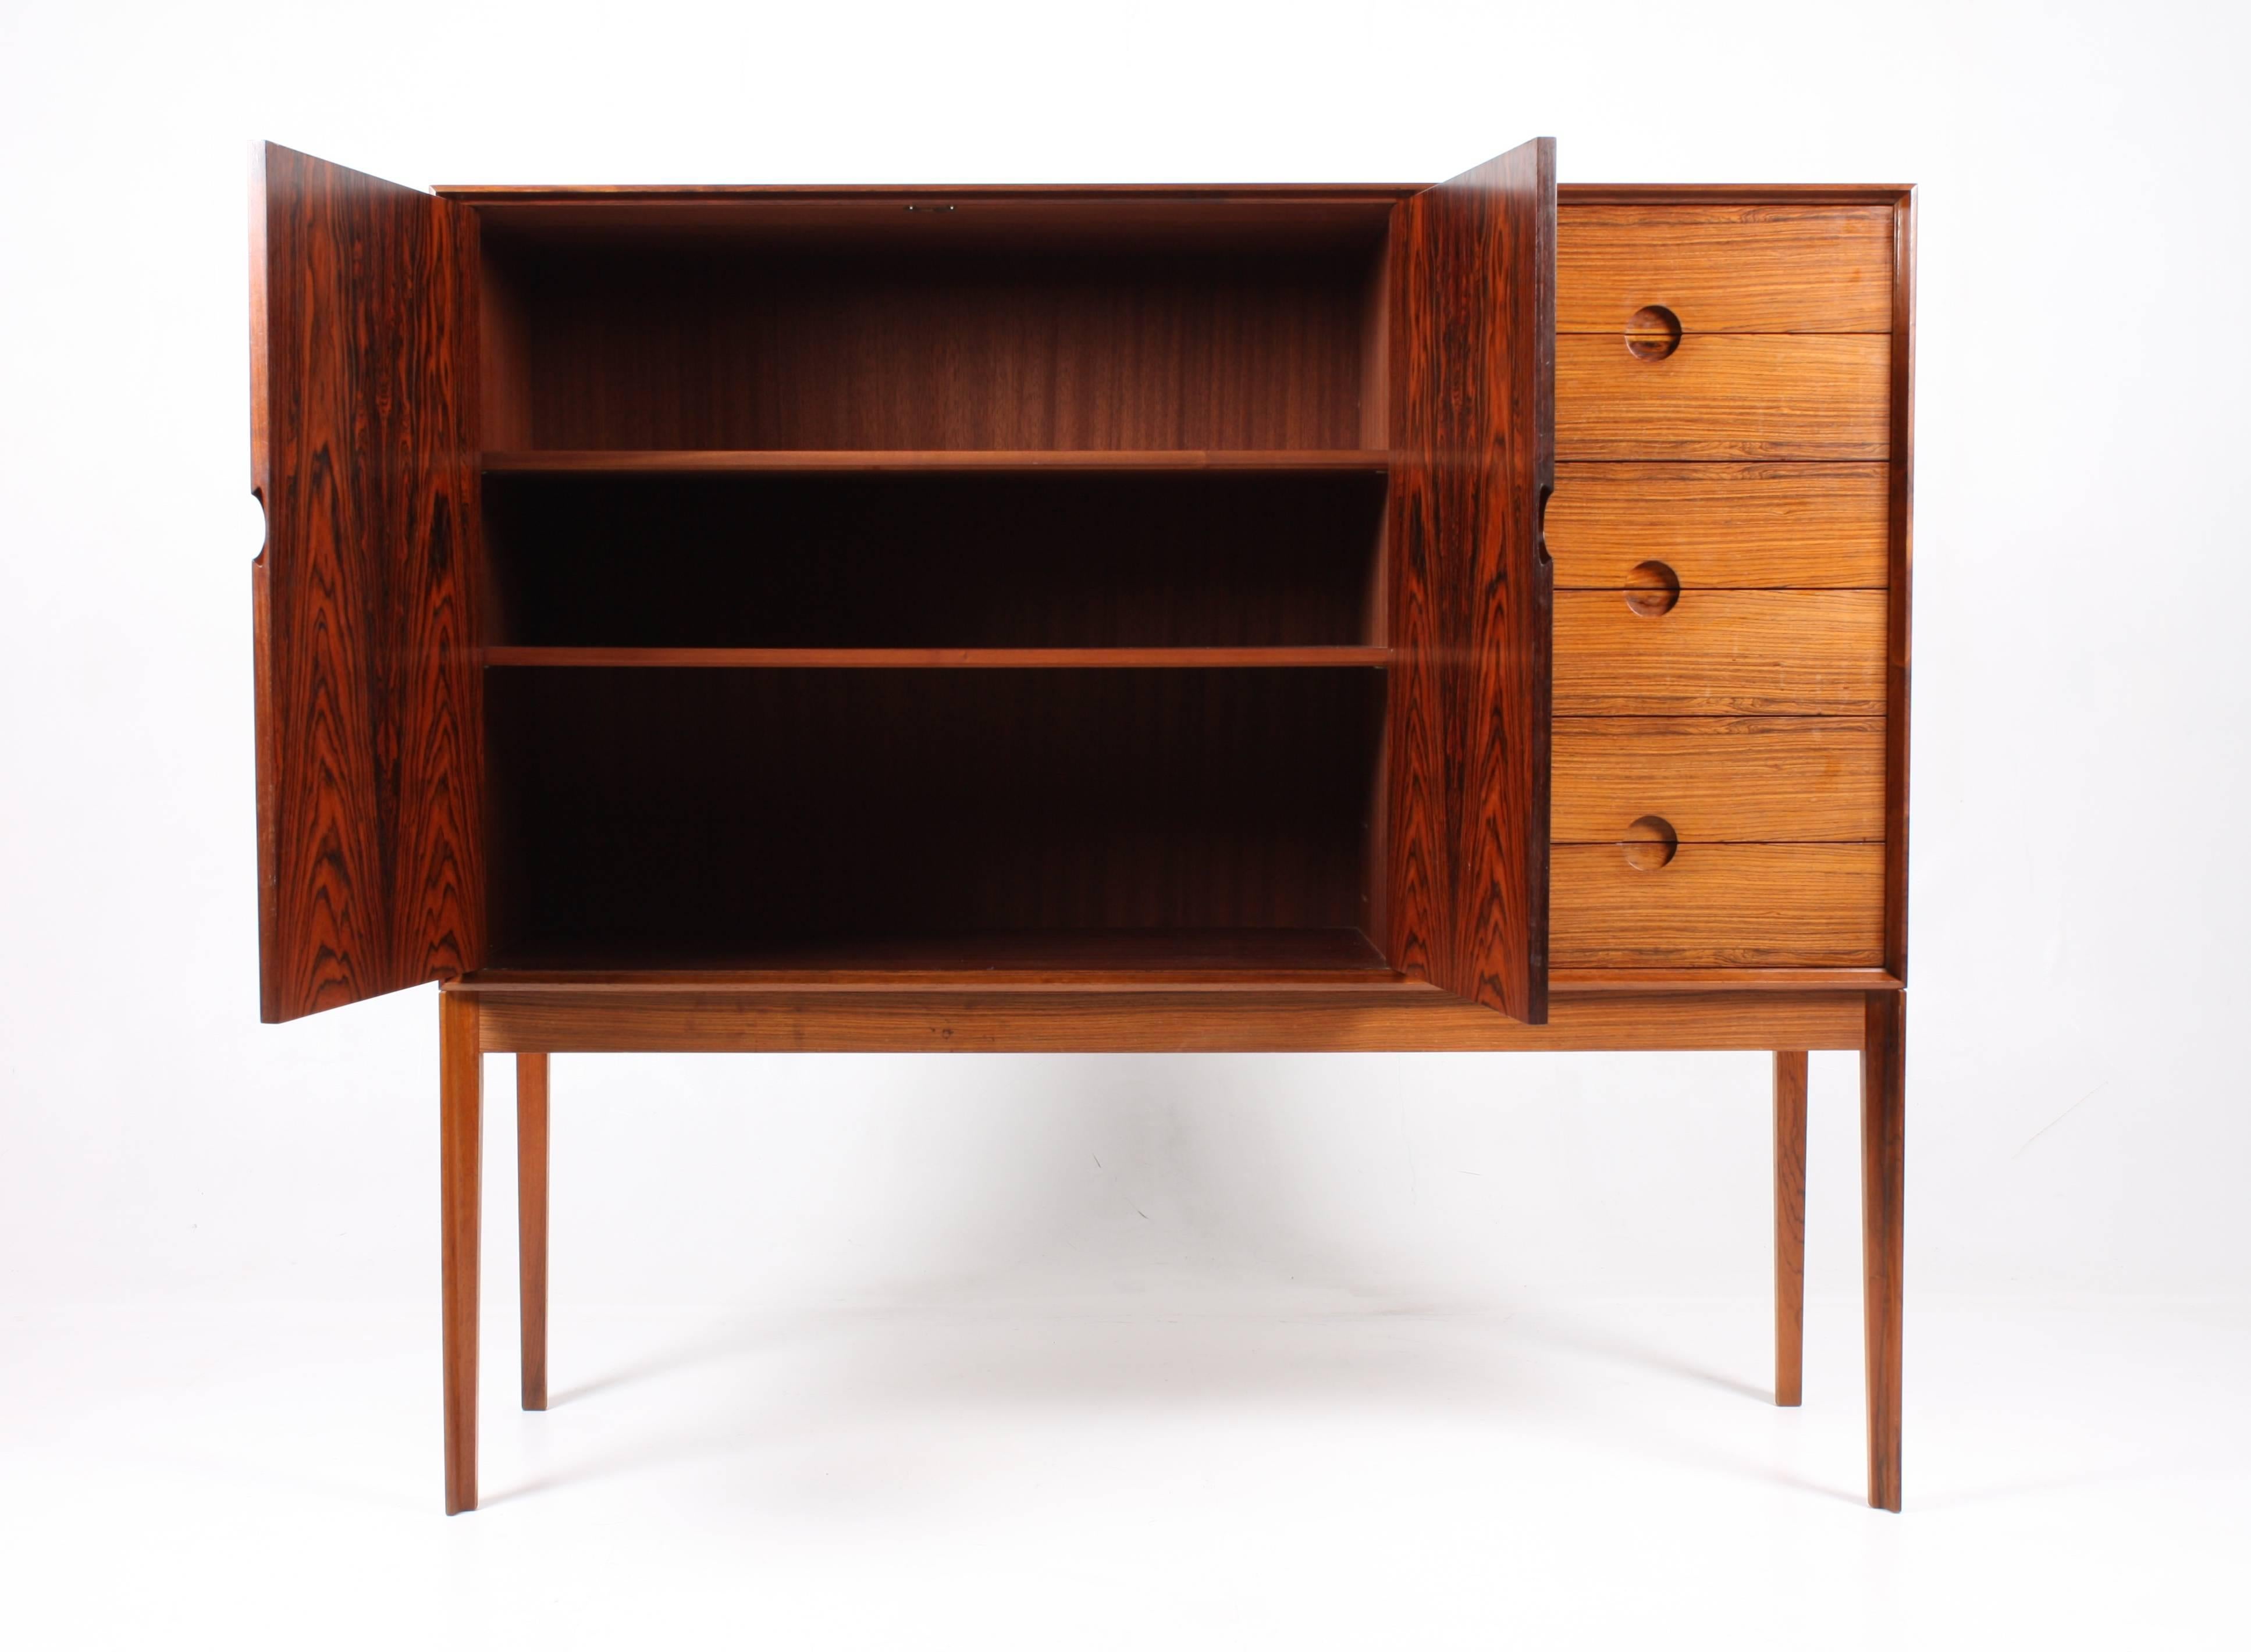 Elegant cabinet in rosewood designed by Kai Kristiansen for Aksel Kjersgaard cabinetmakers in the late 1950s. Outstanding quality and design. Made in Denmark. Great original condition.